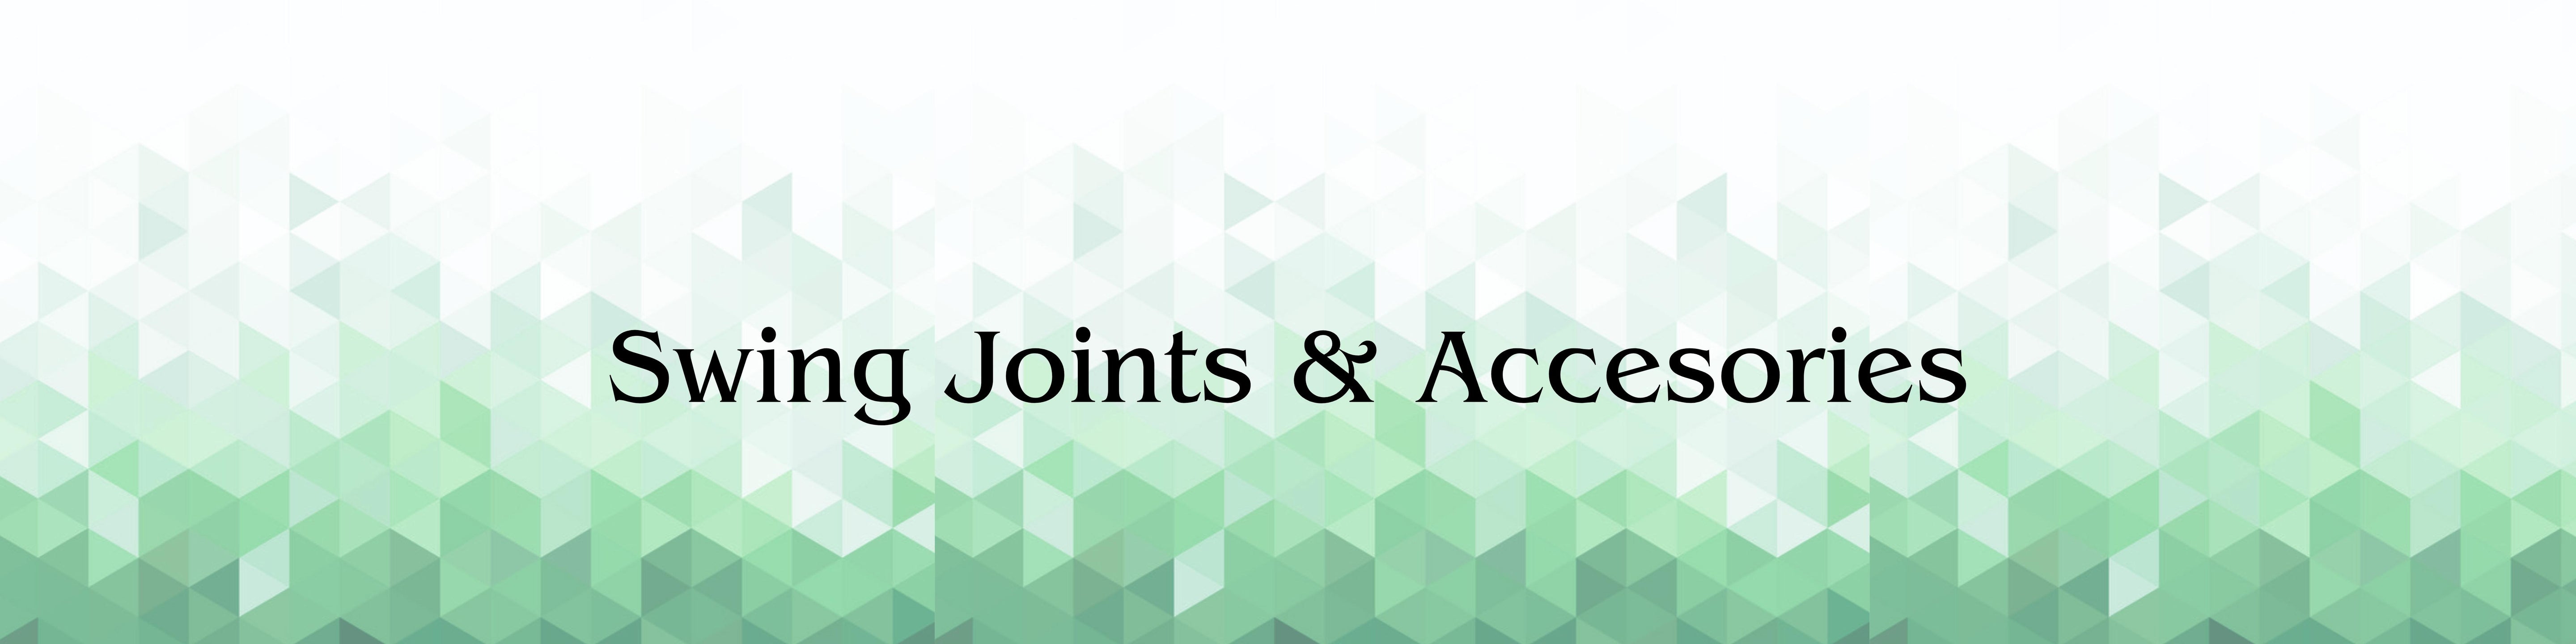 SWING-JOINTS-AND-ACCESSORIES